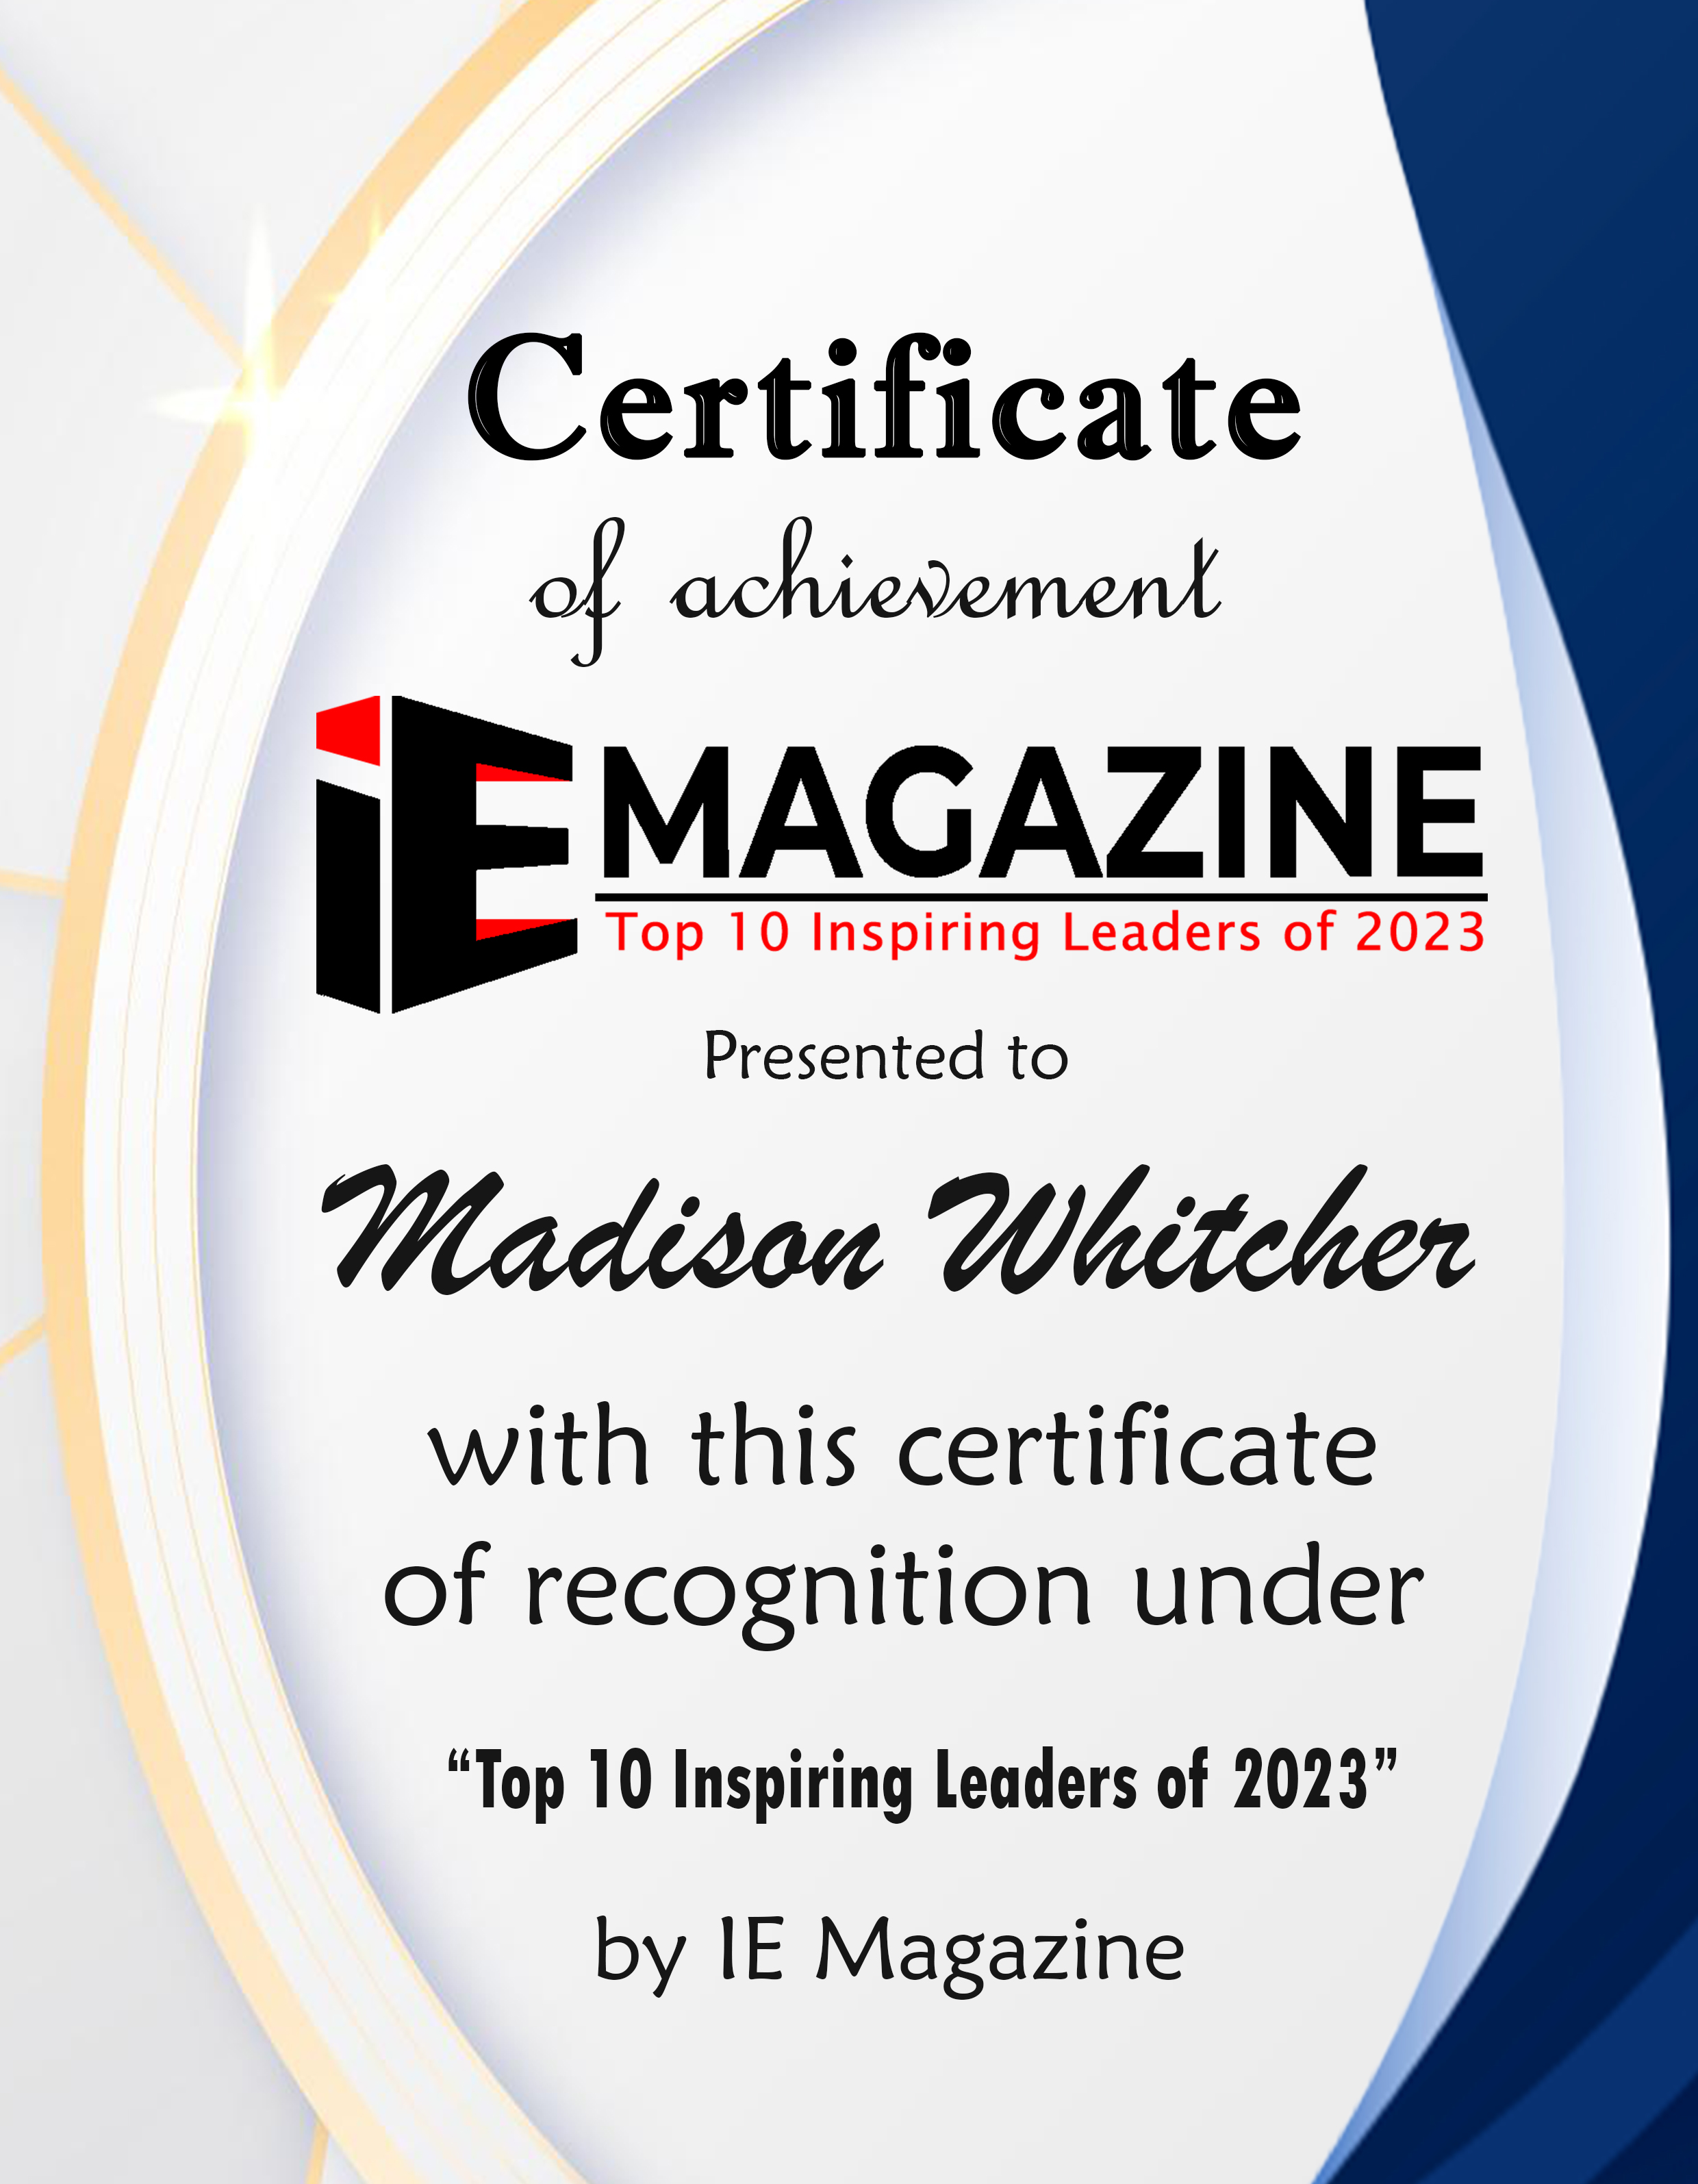 Madison Whitcher, Founder and CEO of MDZN Studio Certificate